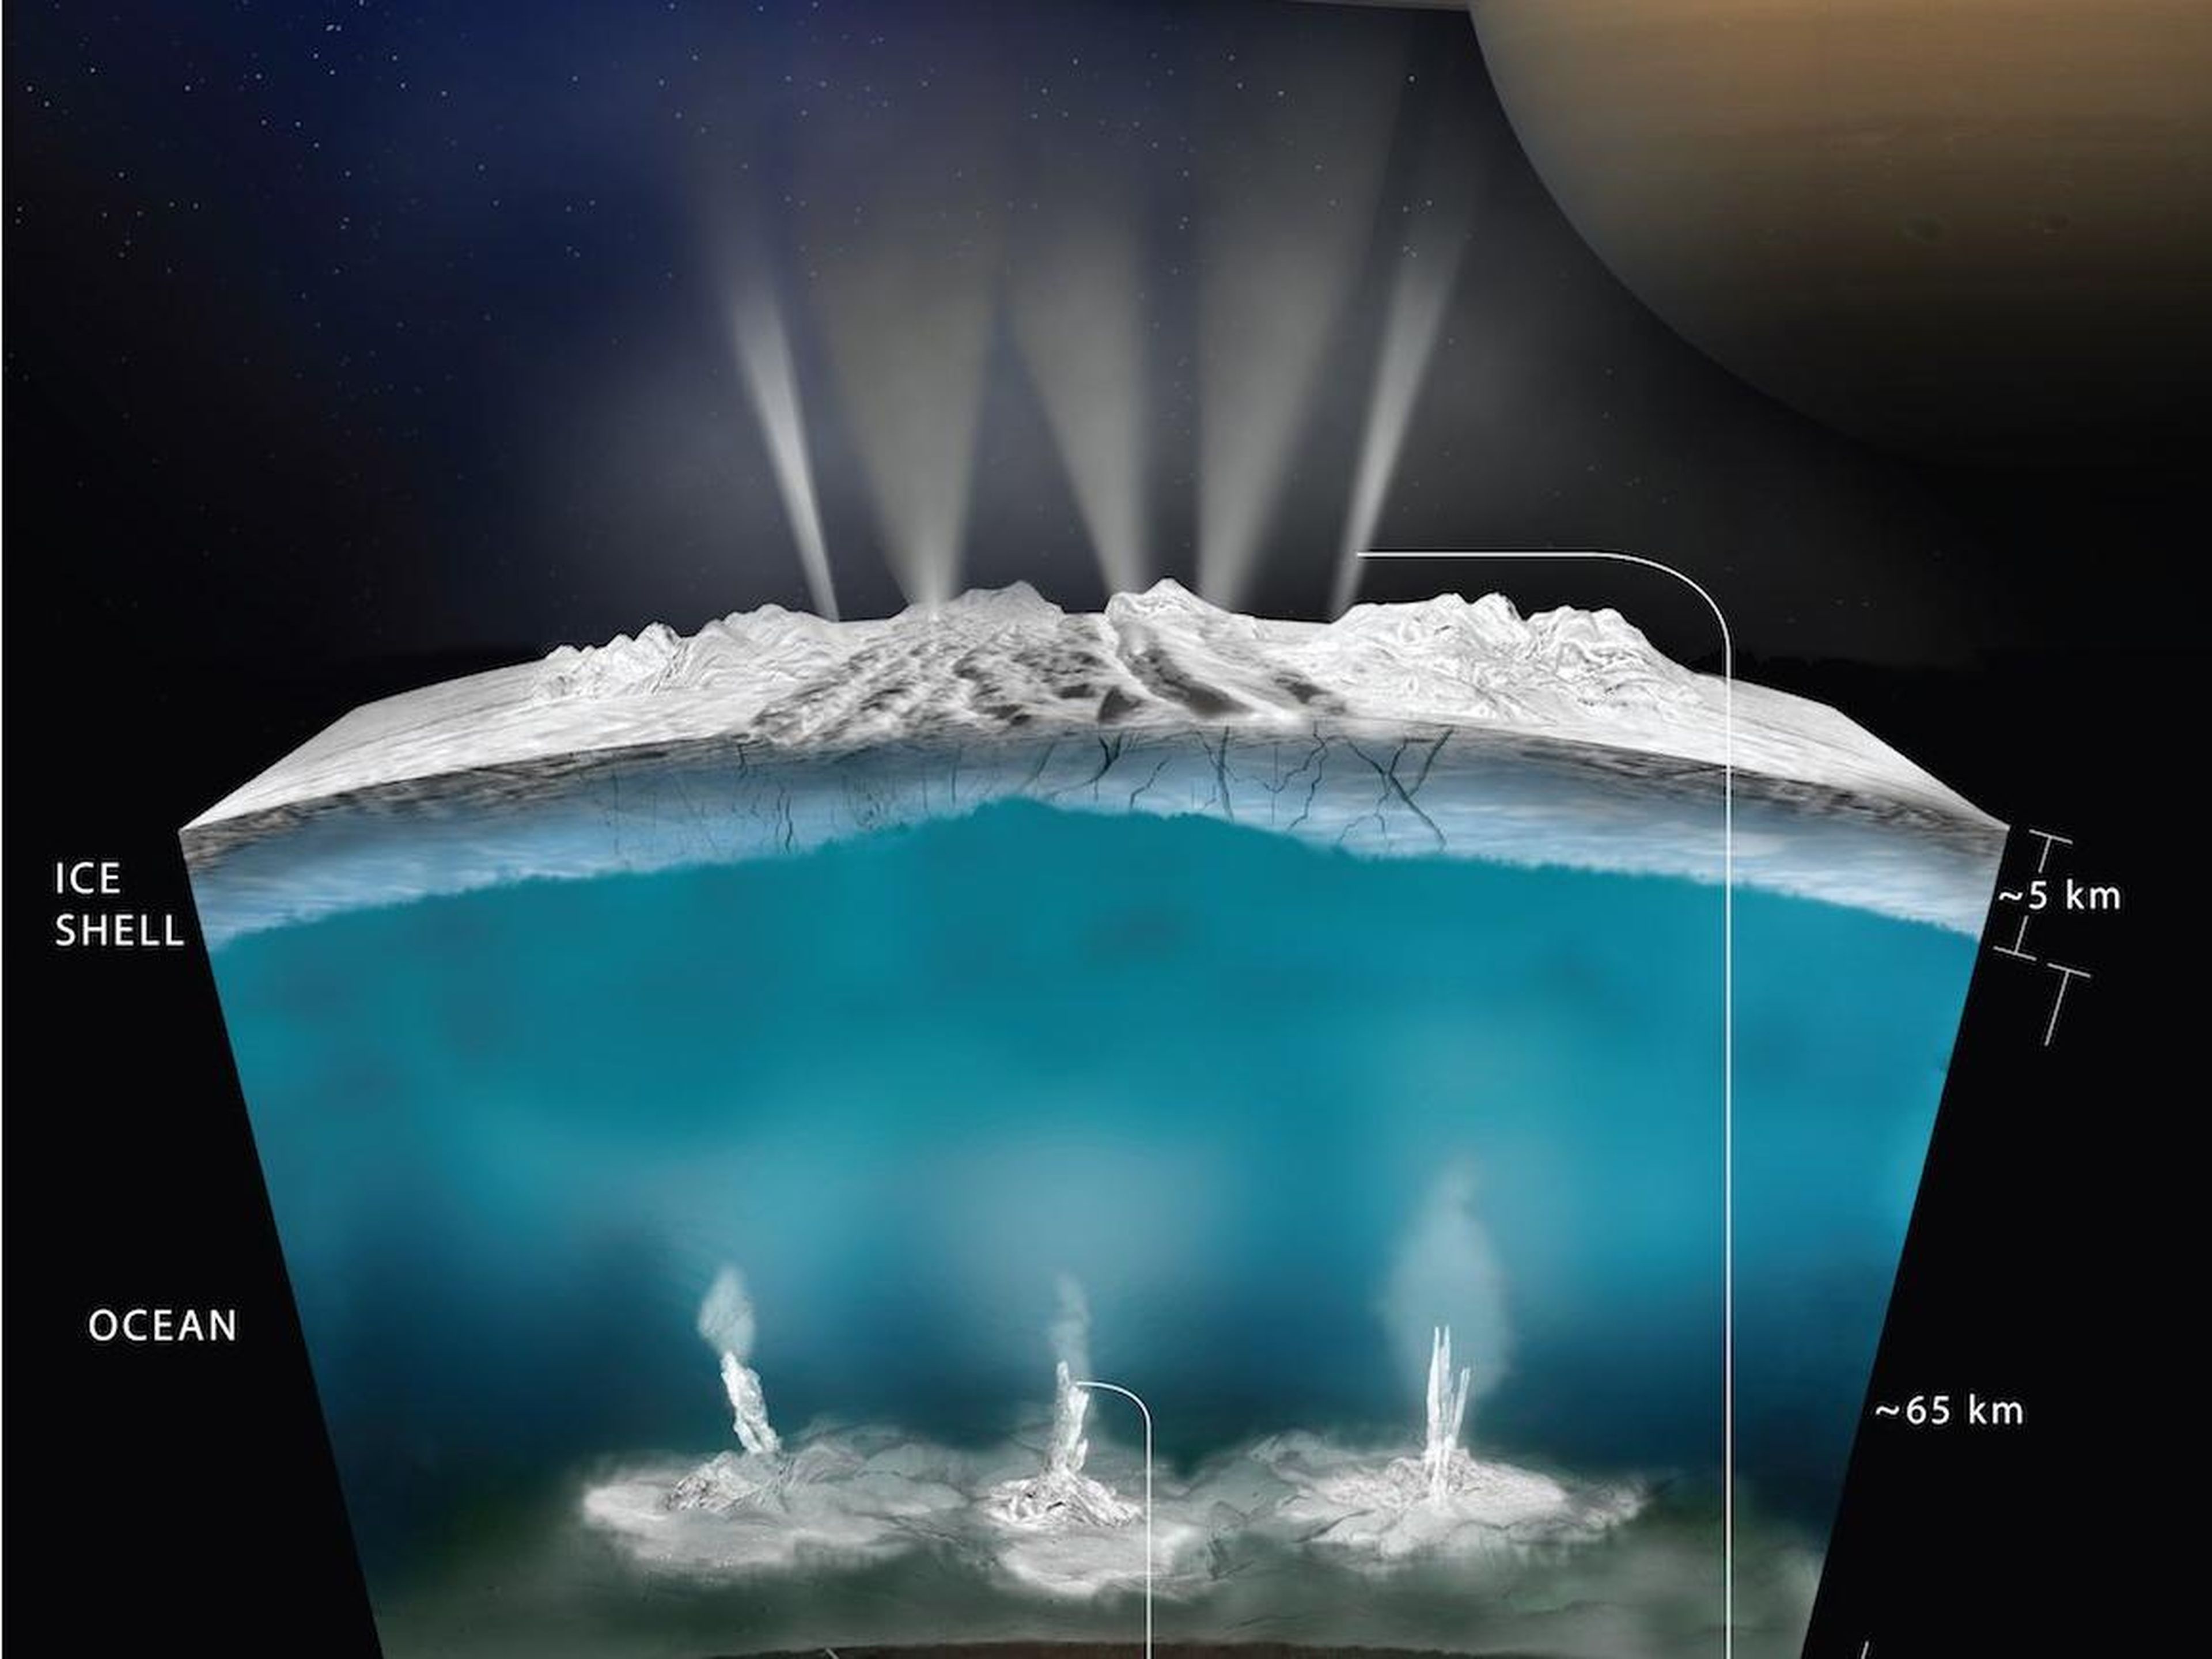 A NASA model shows what the interior ocean on Saturn's moon Enceladus could look like.